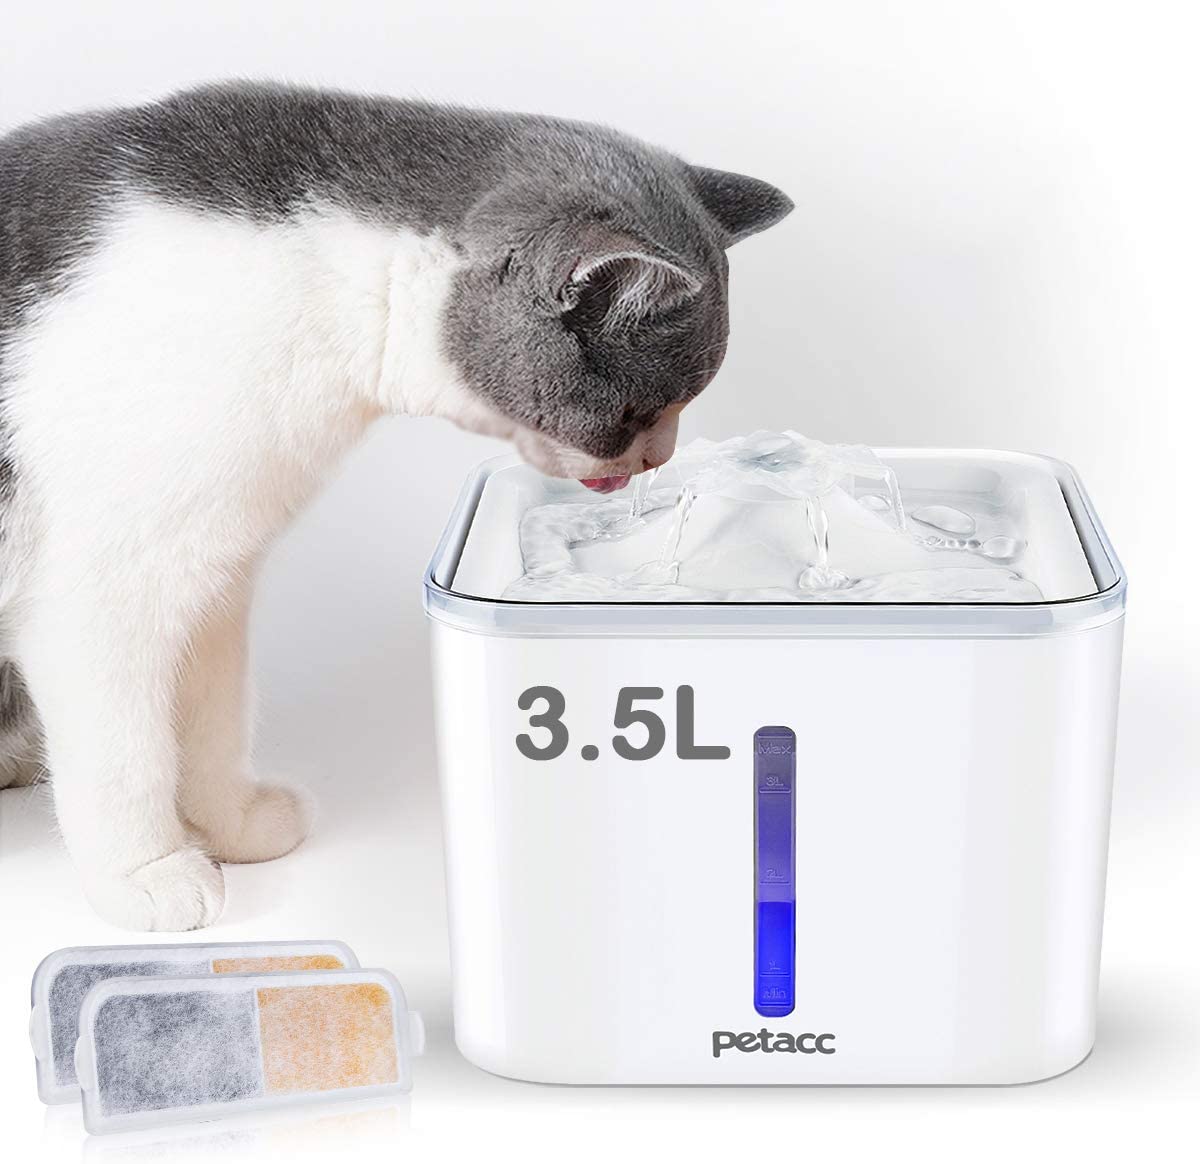 10pcs cat Fountain Drinking Fountain Filter Cotton Activated Carbon Filter pet Electric Drinking Fountain Filter Cotton Round Universal Electric Drinking Fountain Filter Cotton 